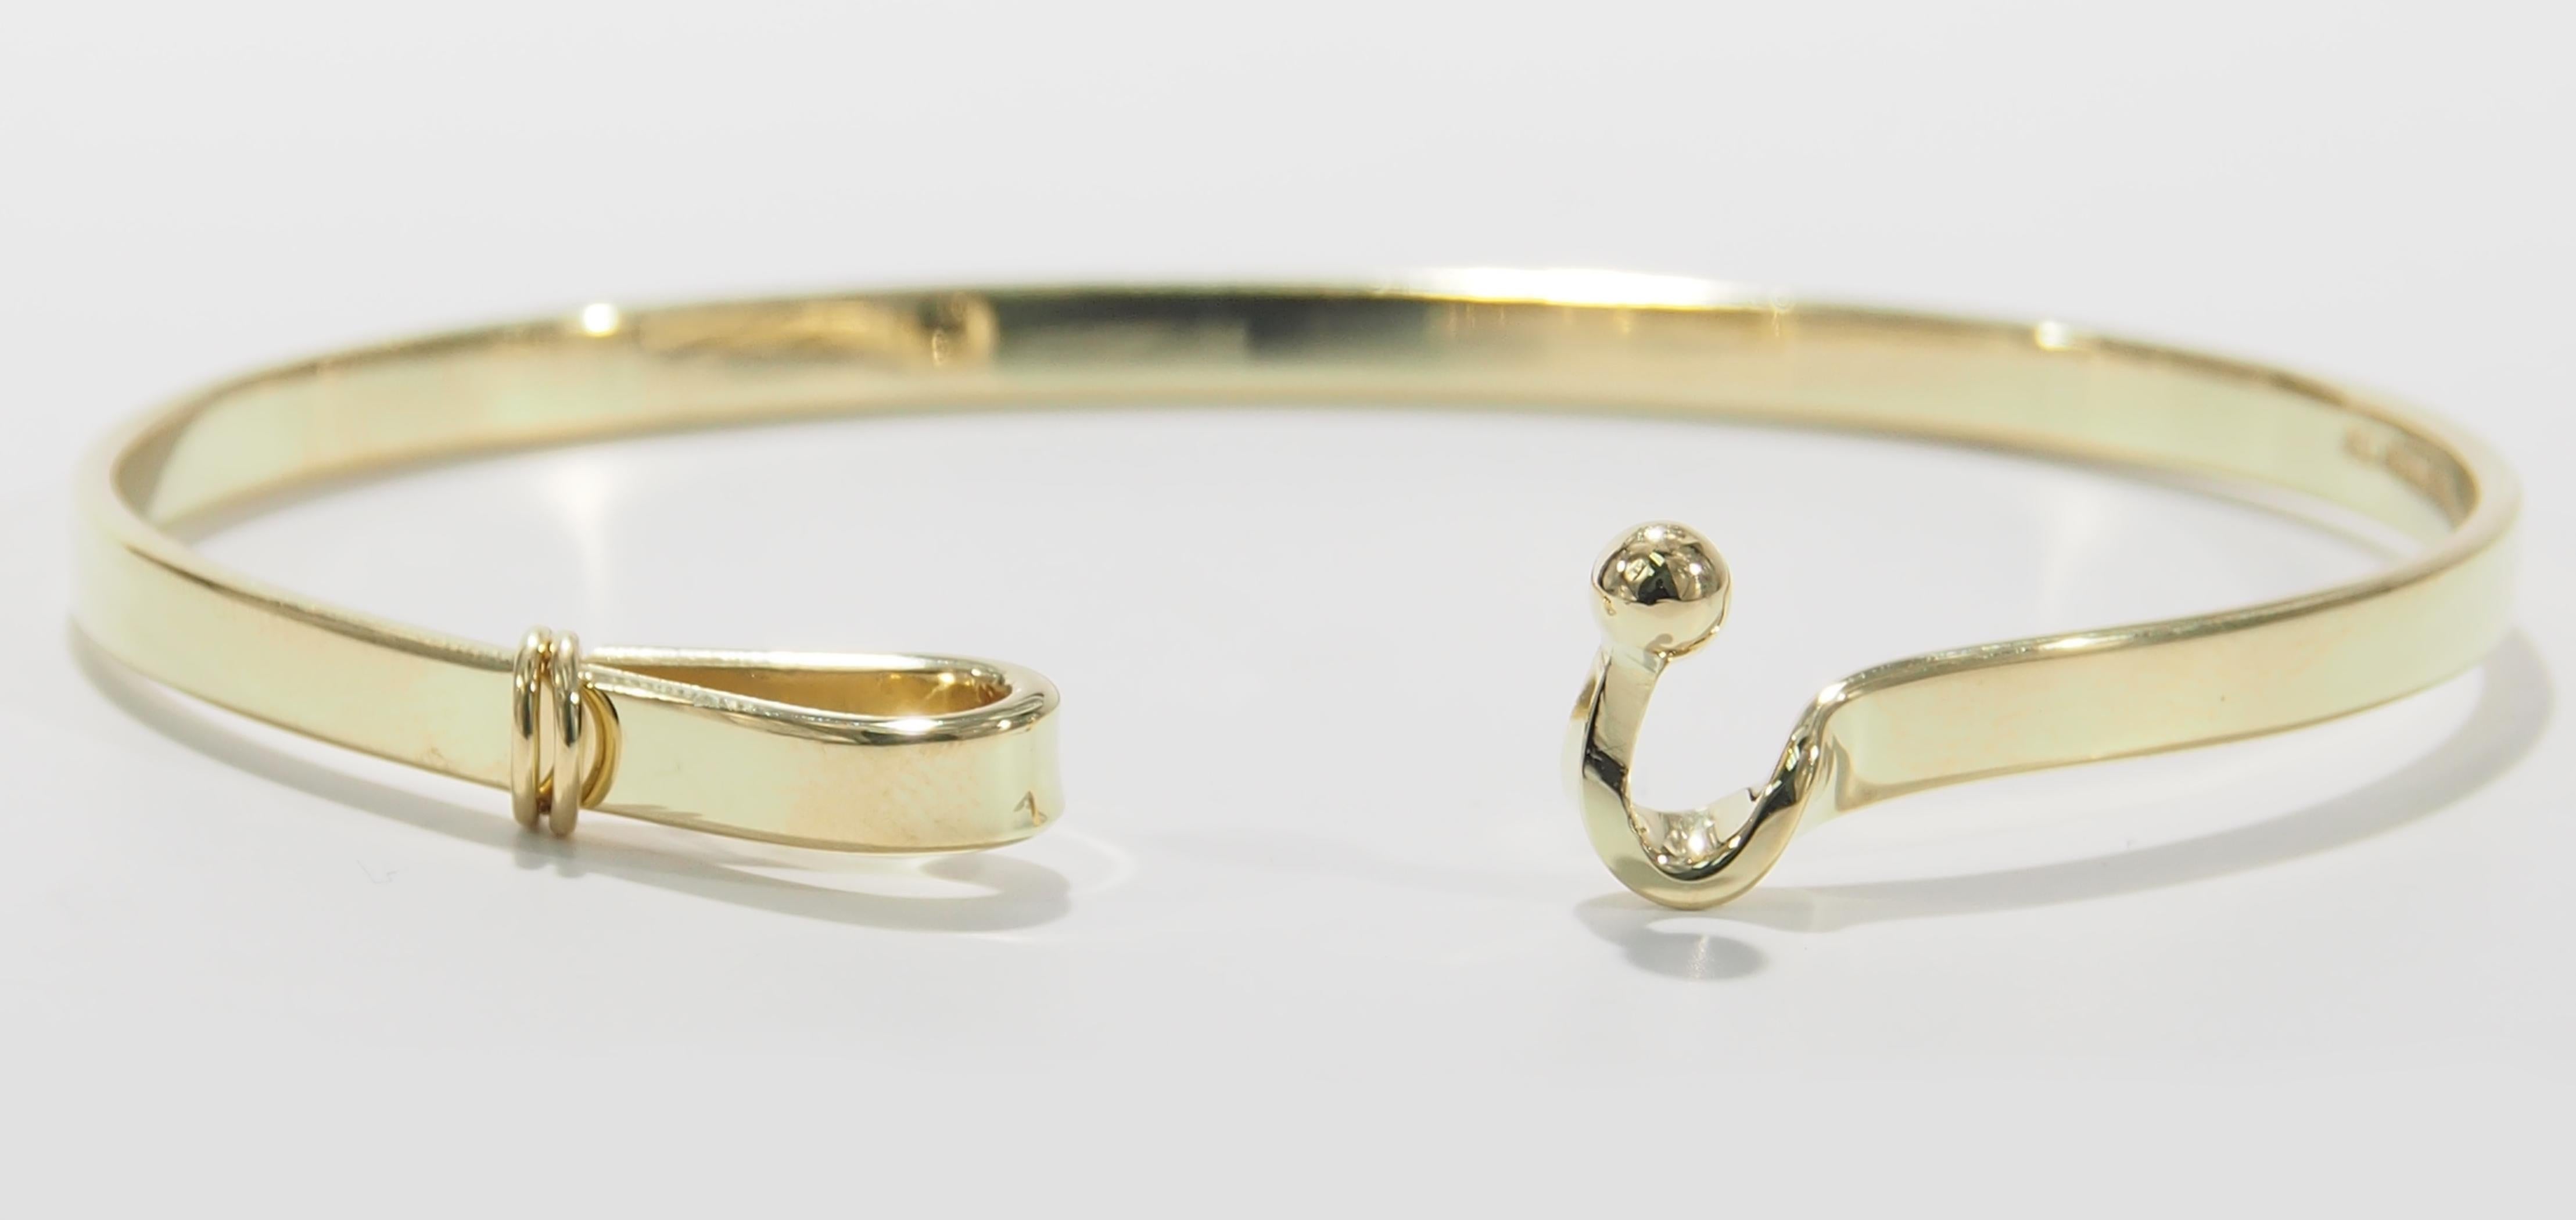 From the Iconic Jewelry Designer, Tiffany & Company is their 18K Yellow Gold 